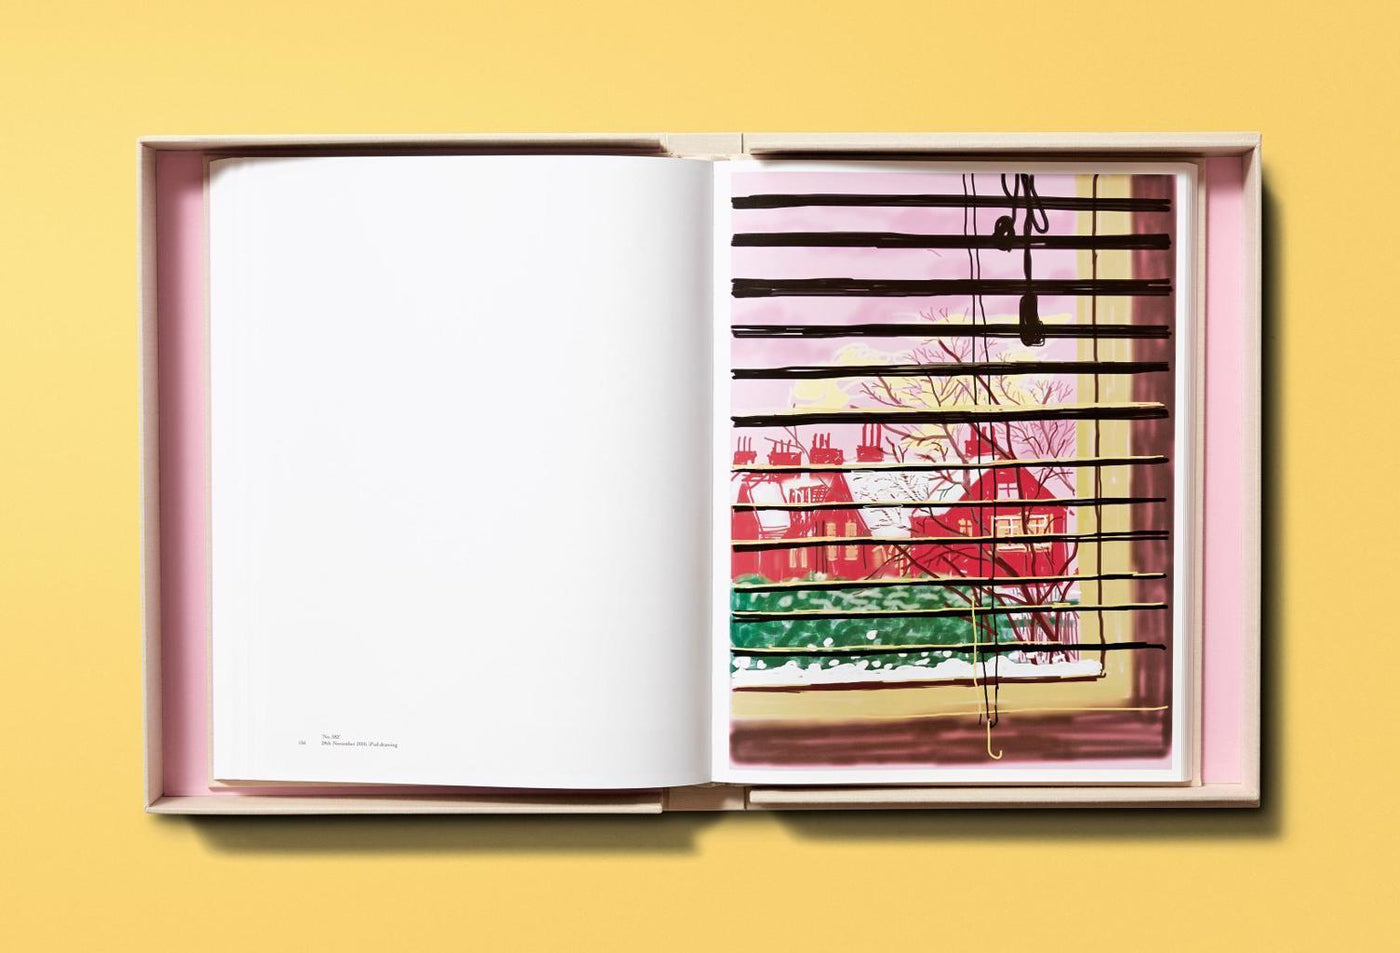 David Hockney | My Window Book | Limited Edition | Signed | Available for Sale | 2020 | Inside Page